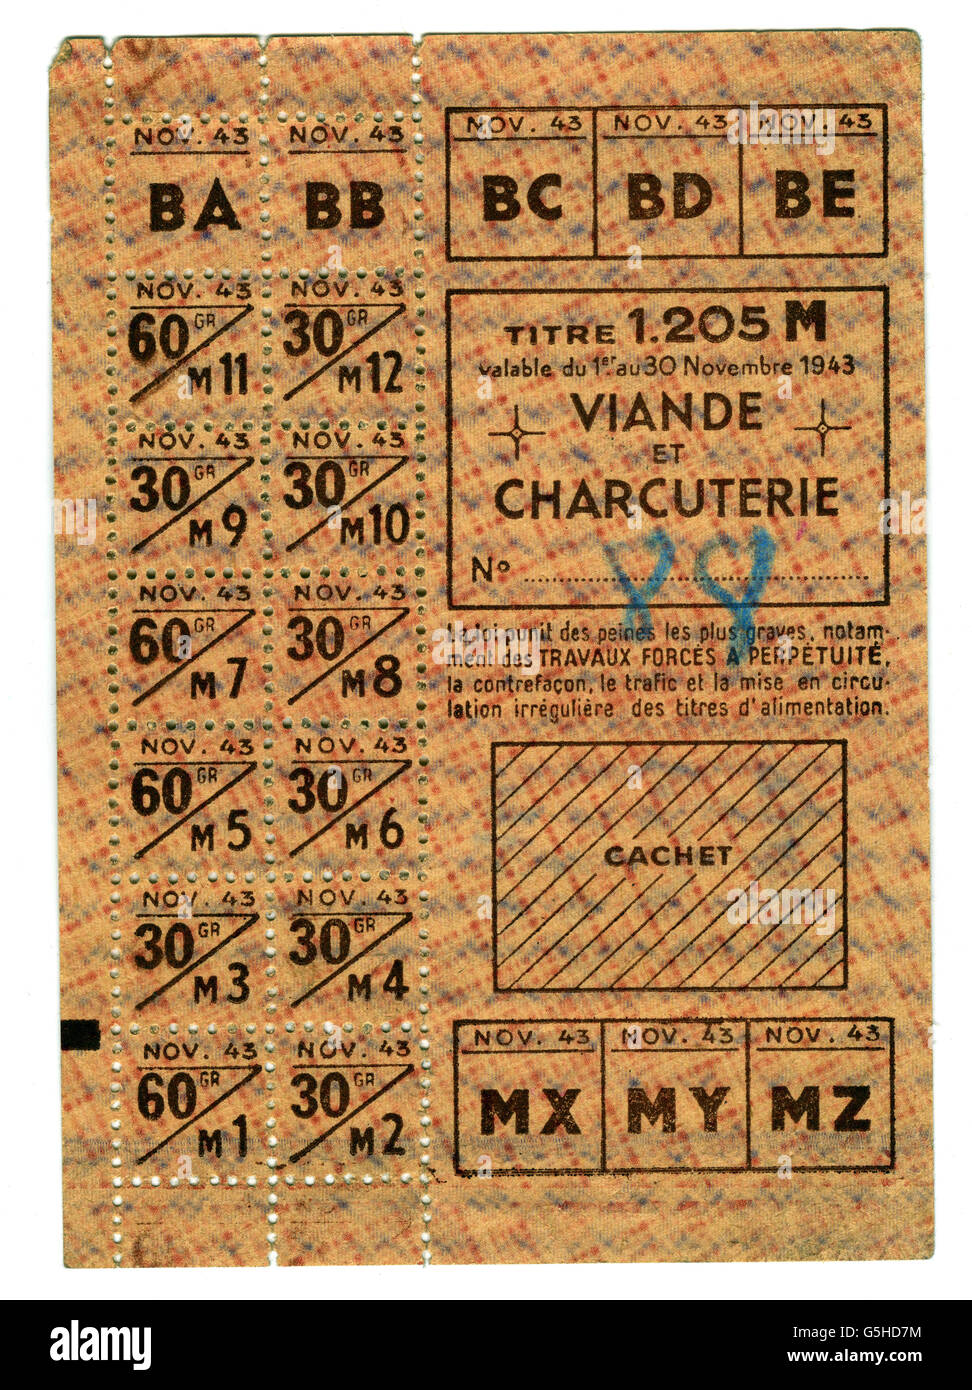 events, Second World War / WWII, France, German occupation, ration card for meat and sausage products, November 1943, Additional-Rights-Clearences-Not Available Stock Photo